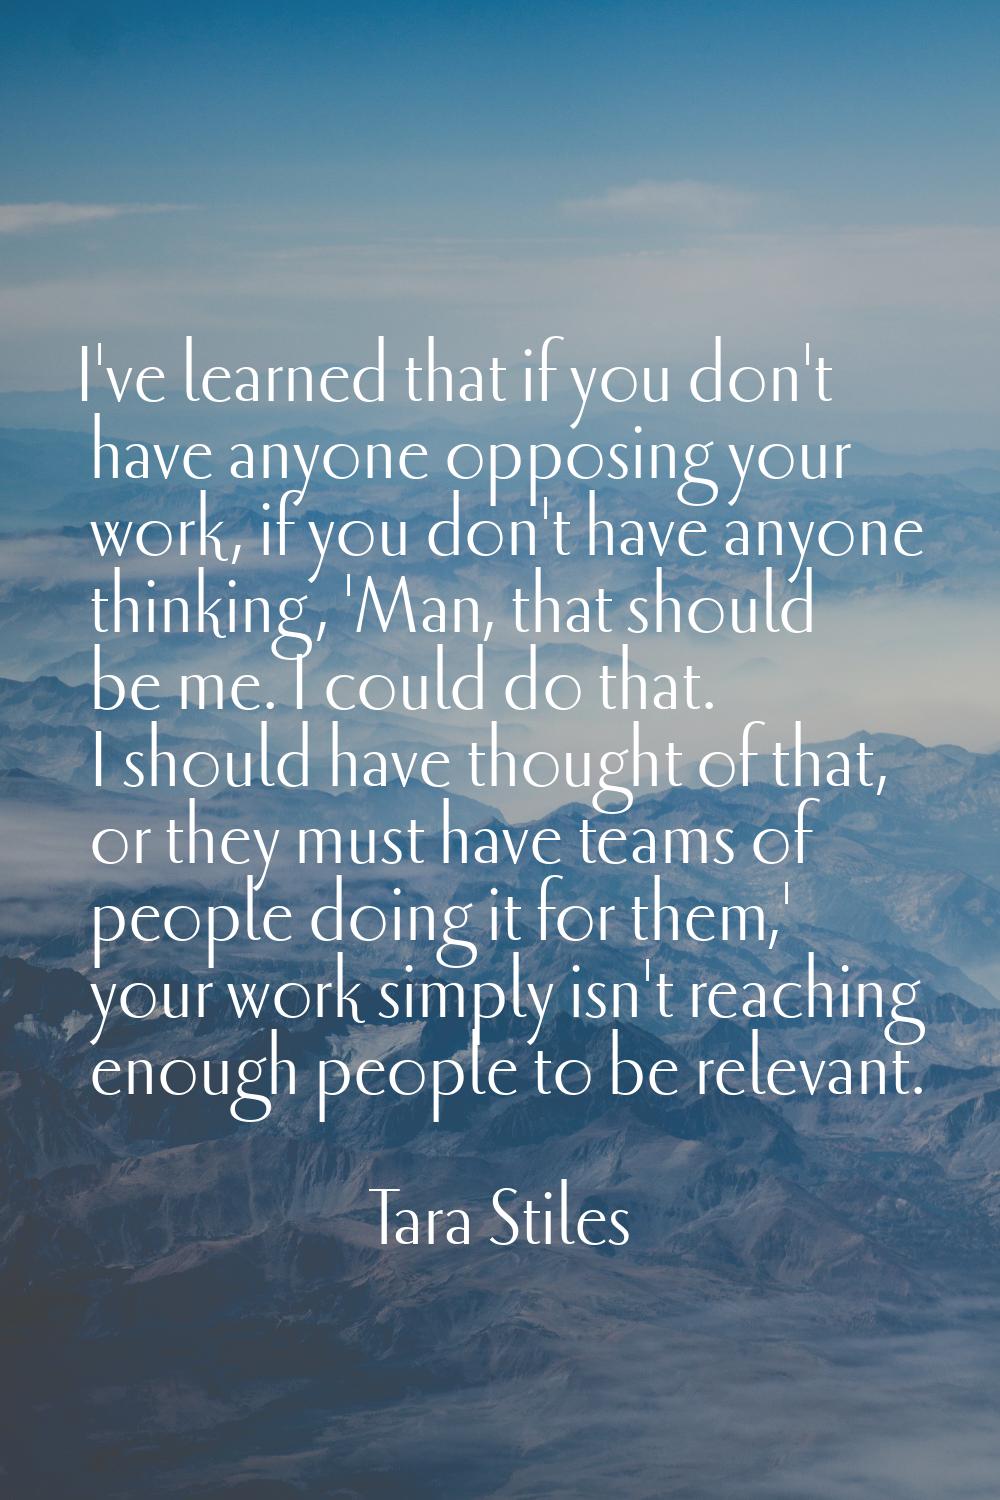 I've learned that if you don't have anyone opposing your work, if you don't have anyone thinking, '